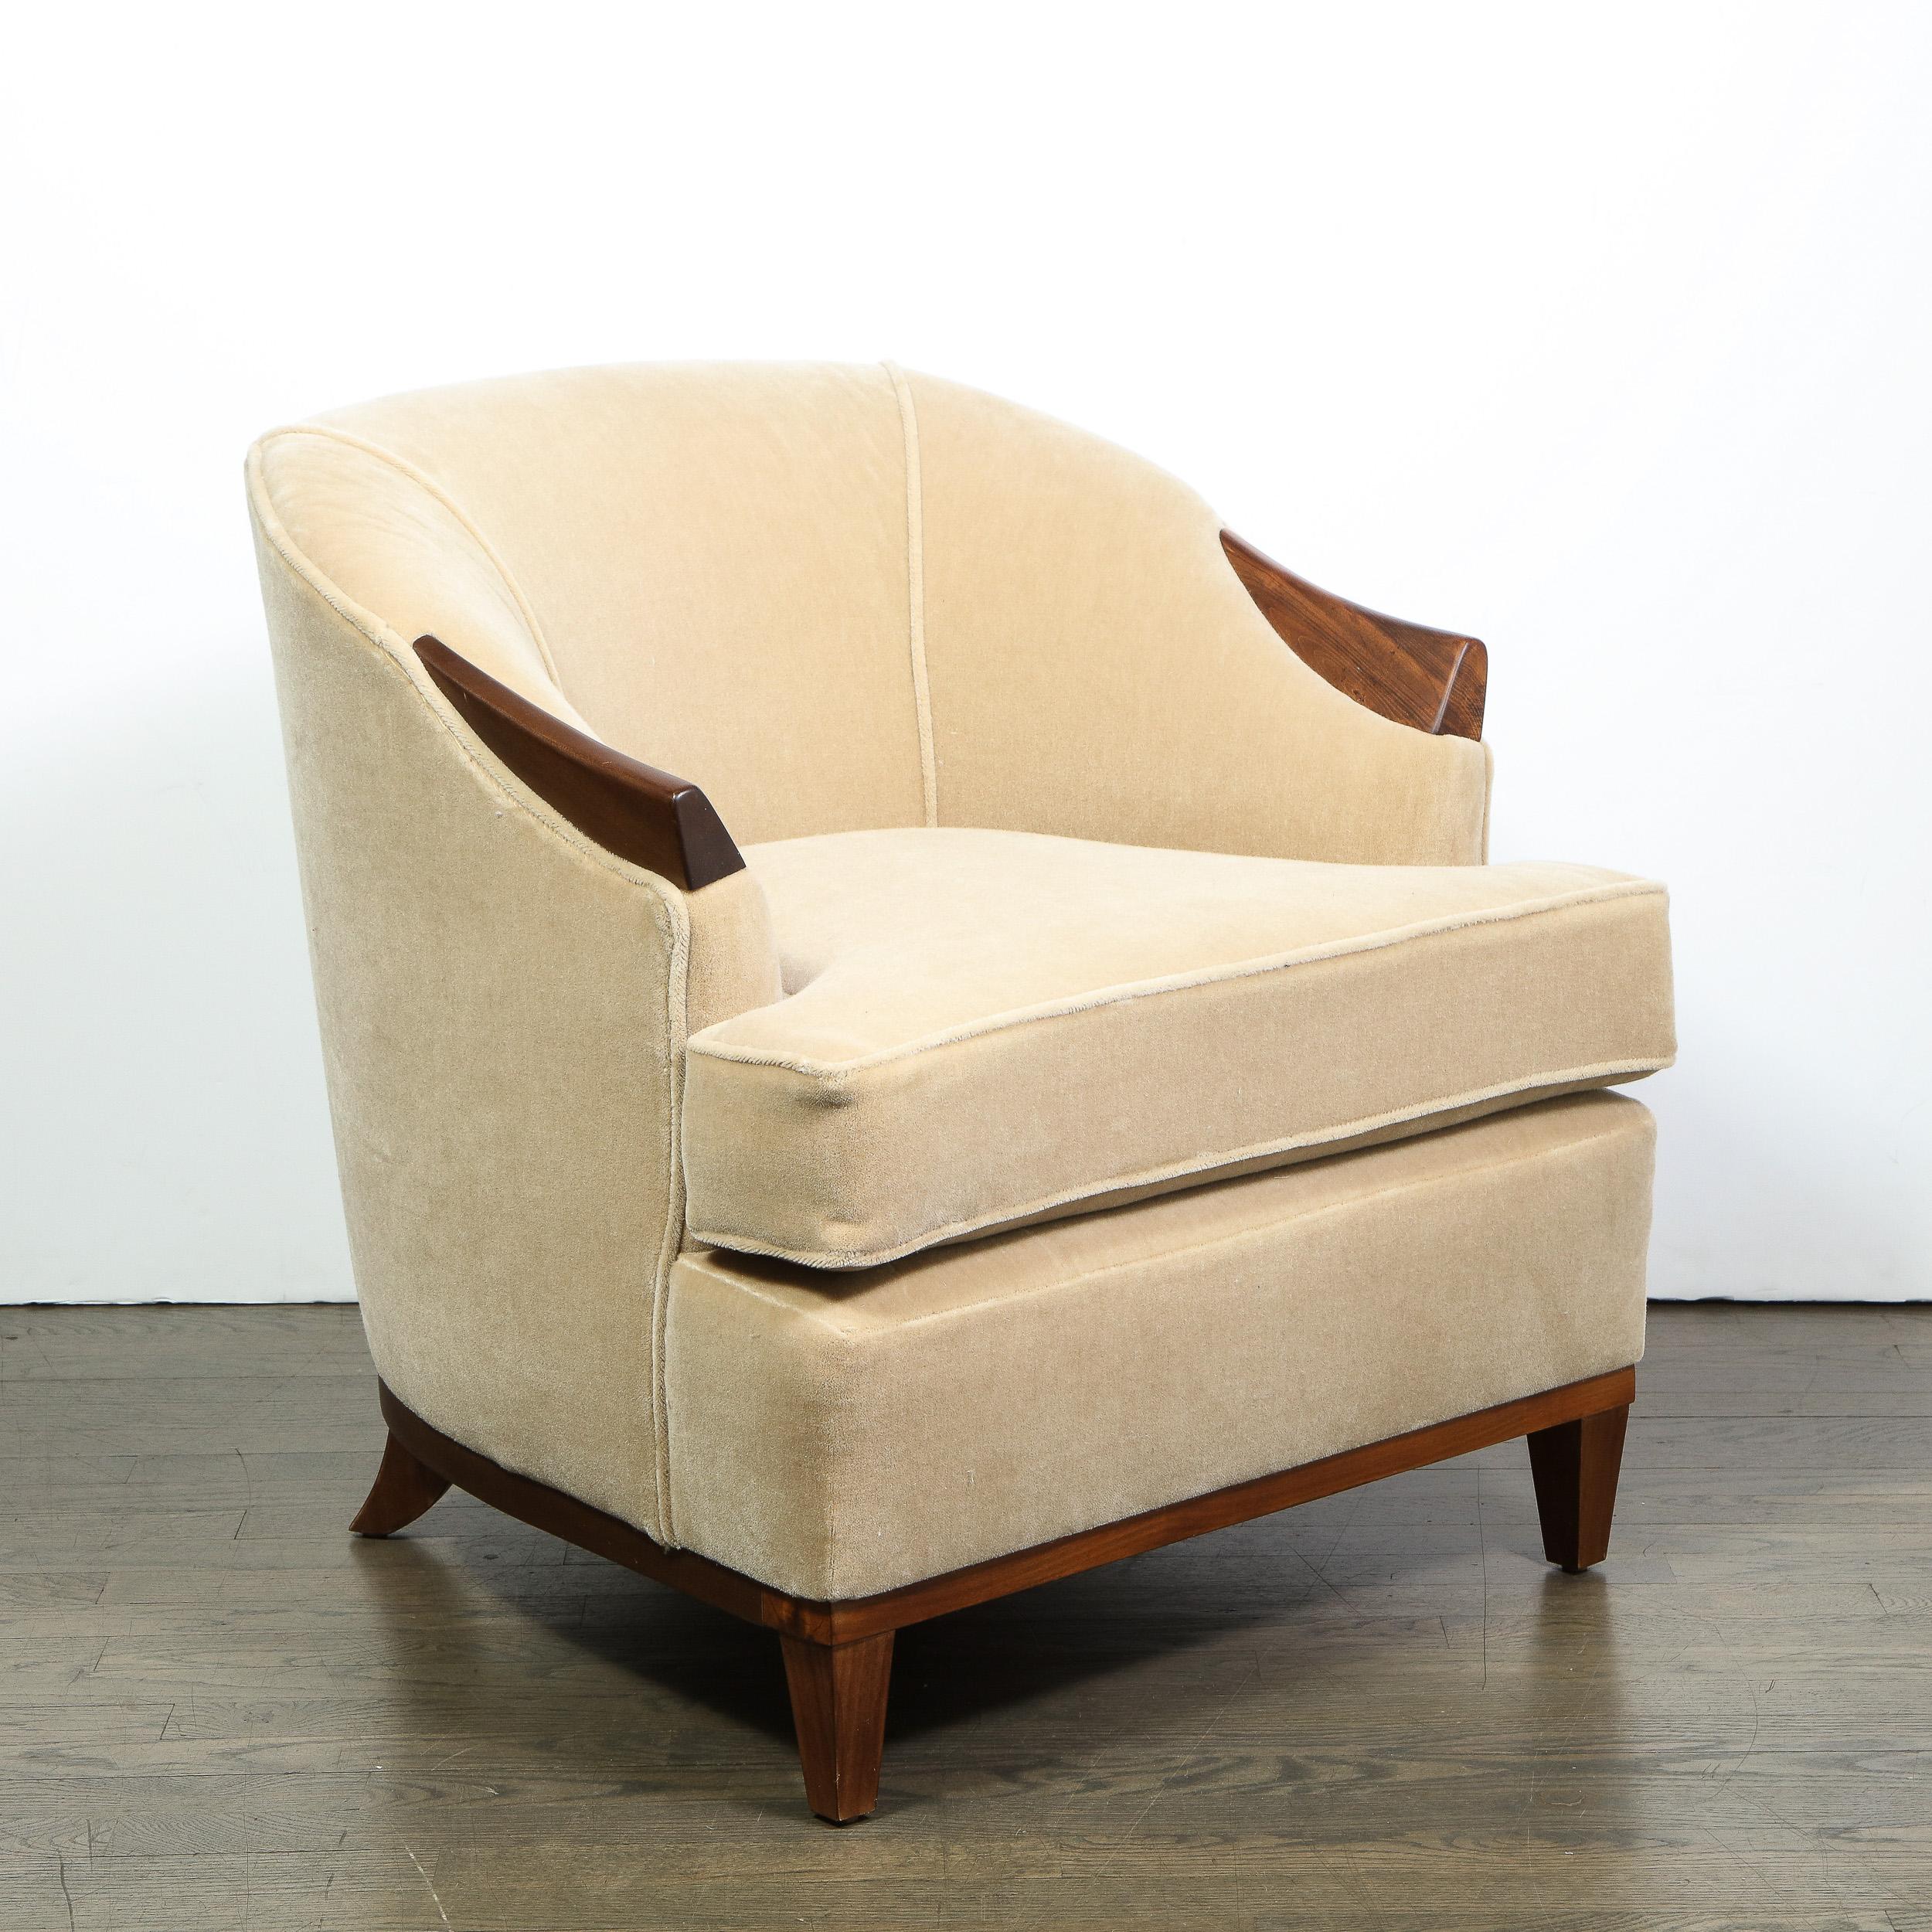 Pair of 1950s American Mid-Century Modern Ecru Mohair and Walnut Armchairs 9